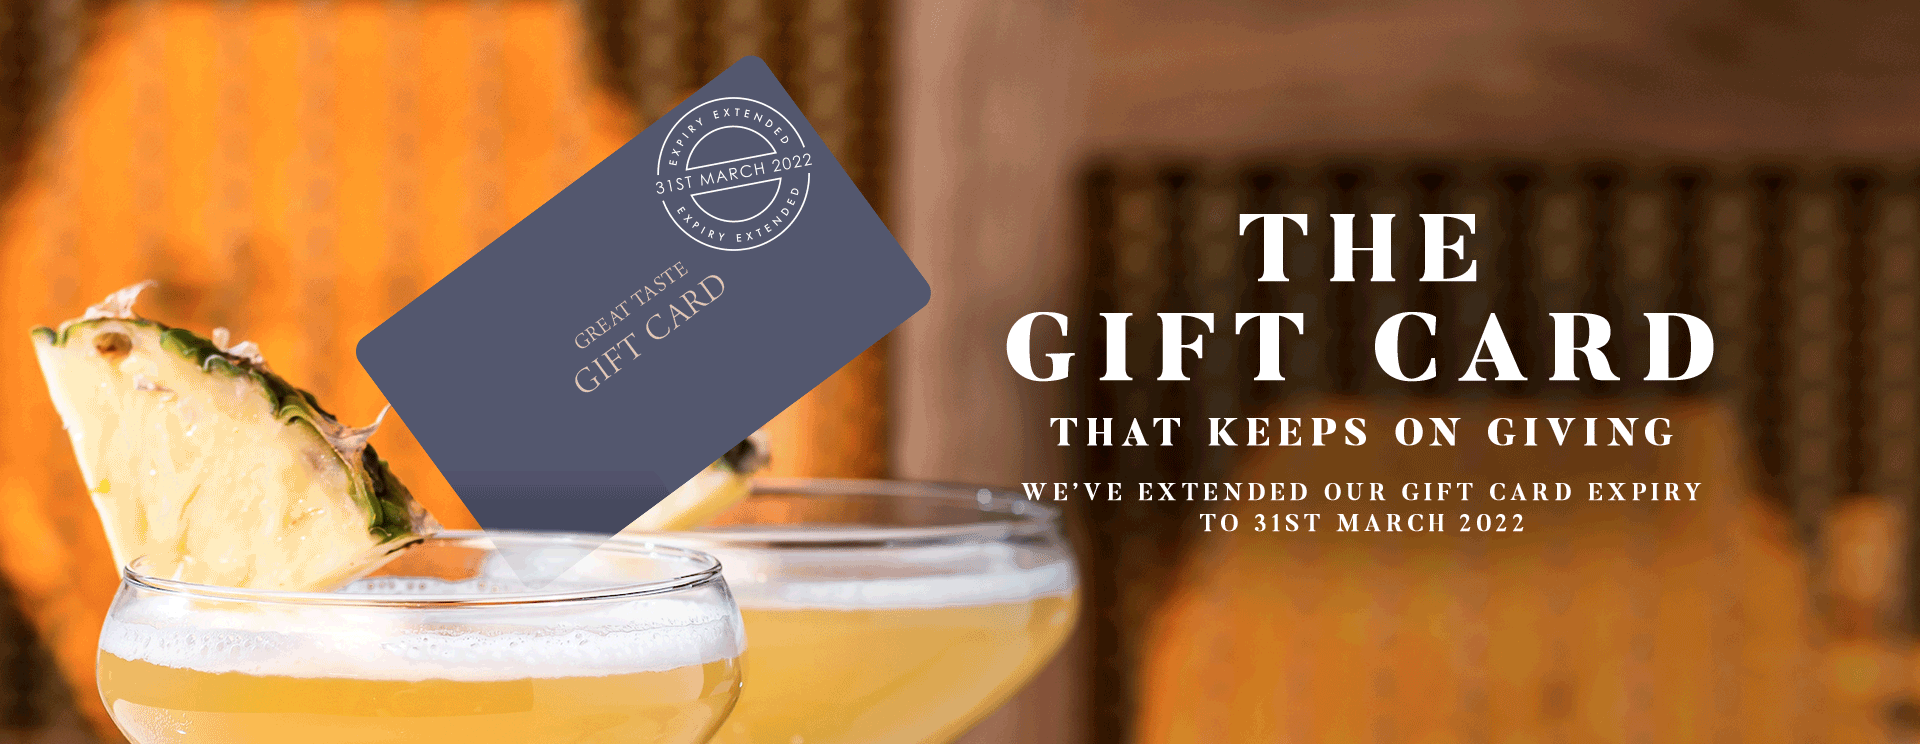 Give the gift of a gift card at The Royal Saracens Head